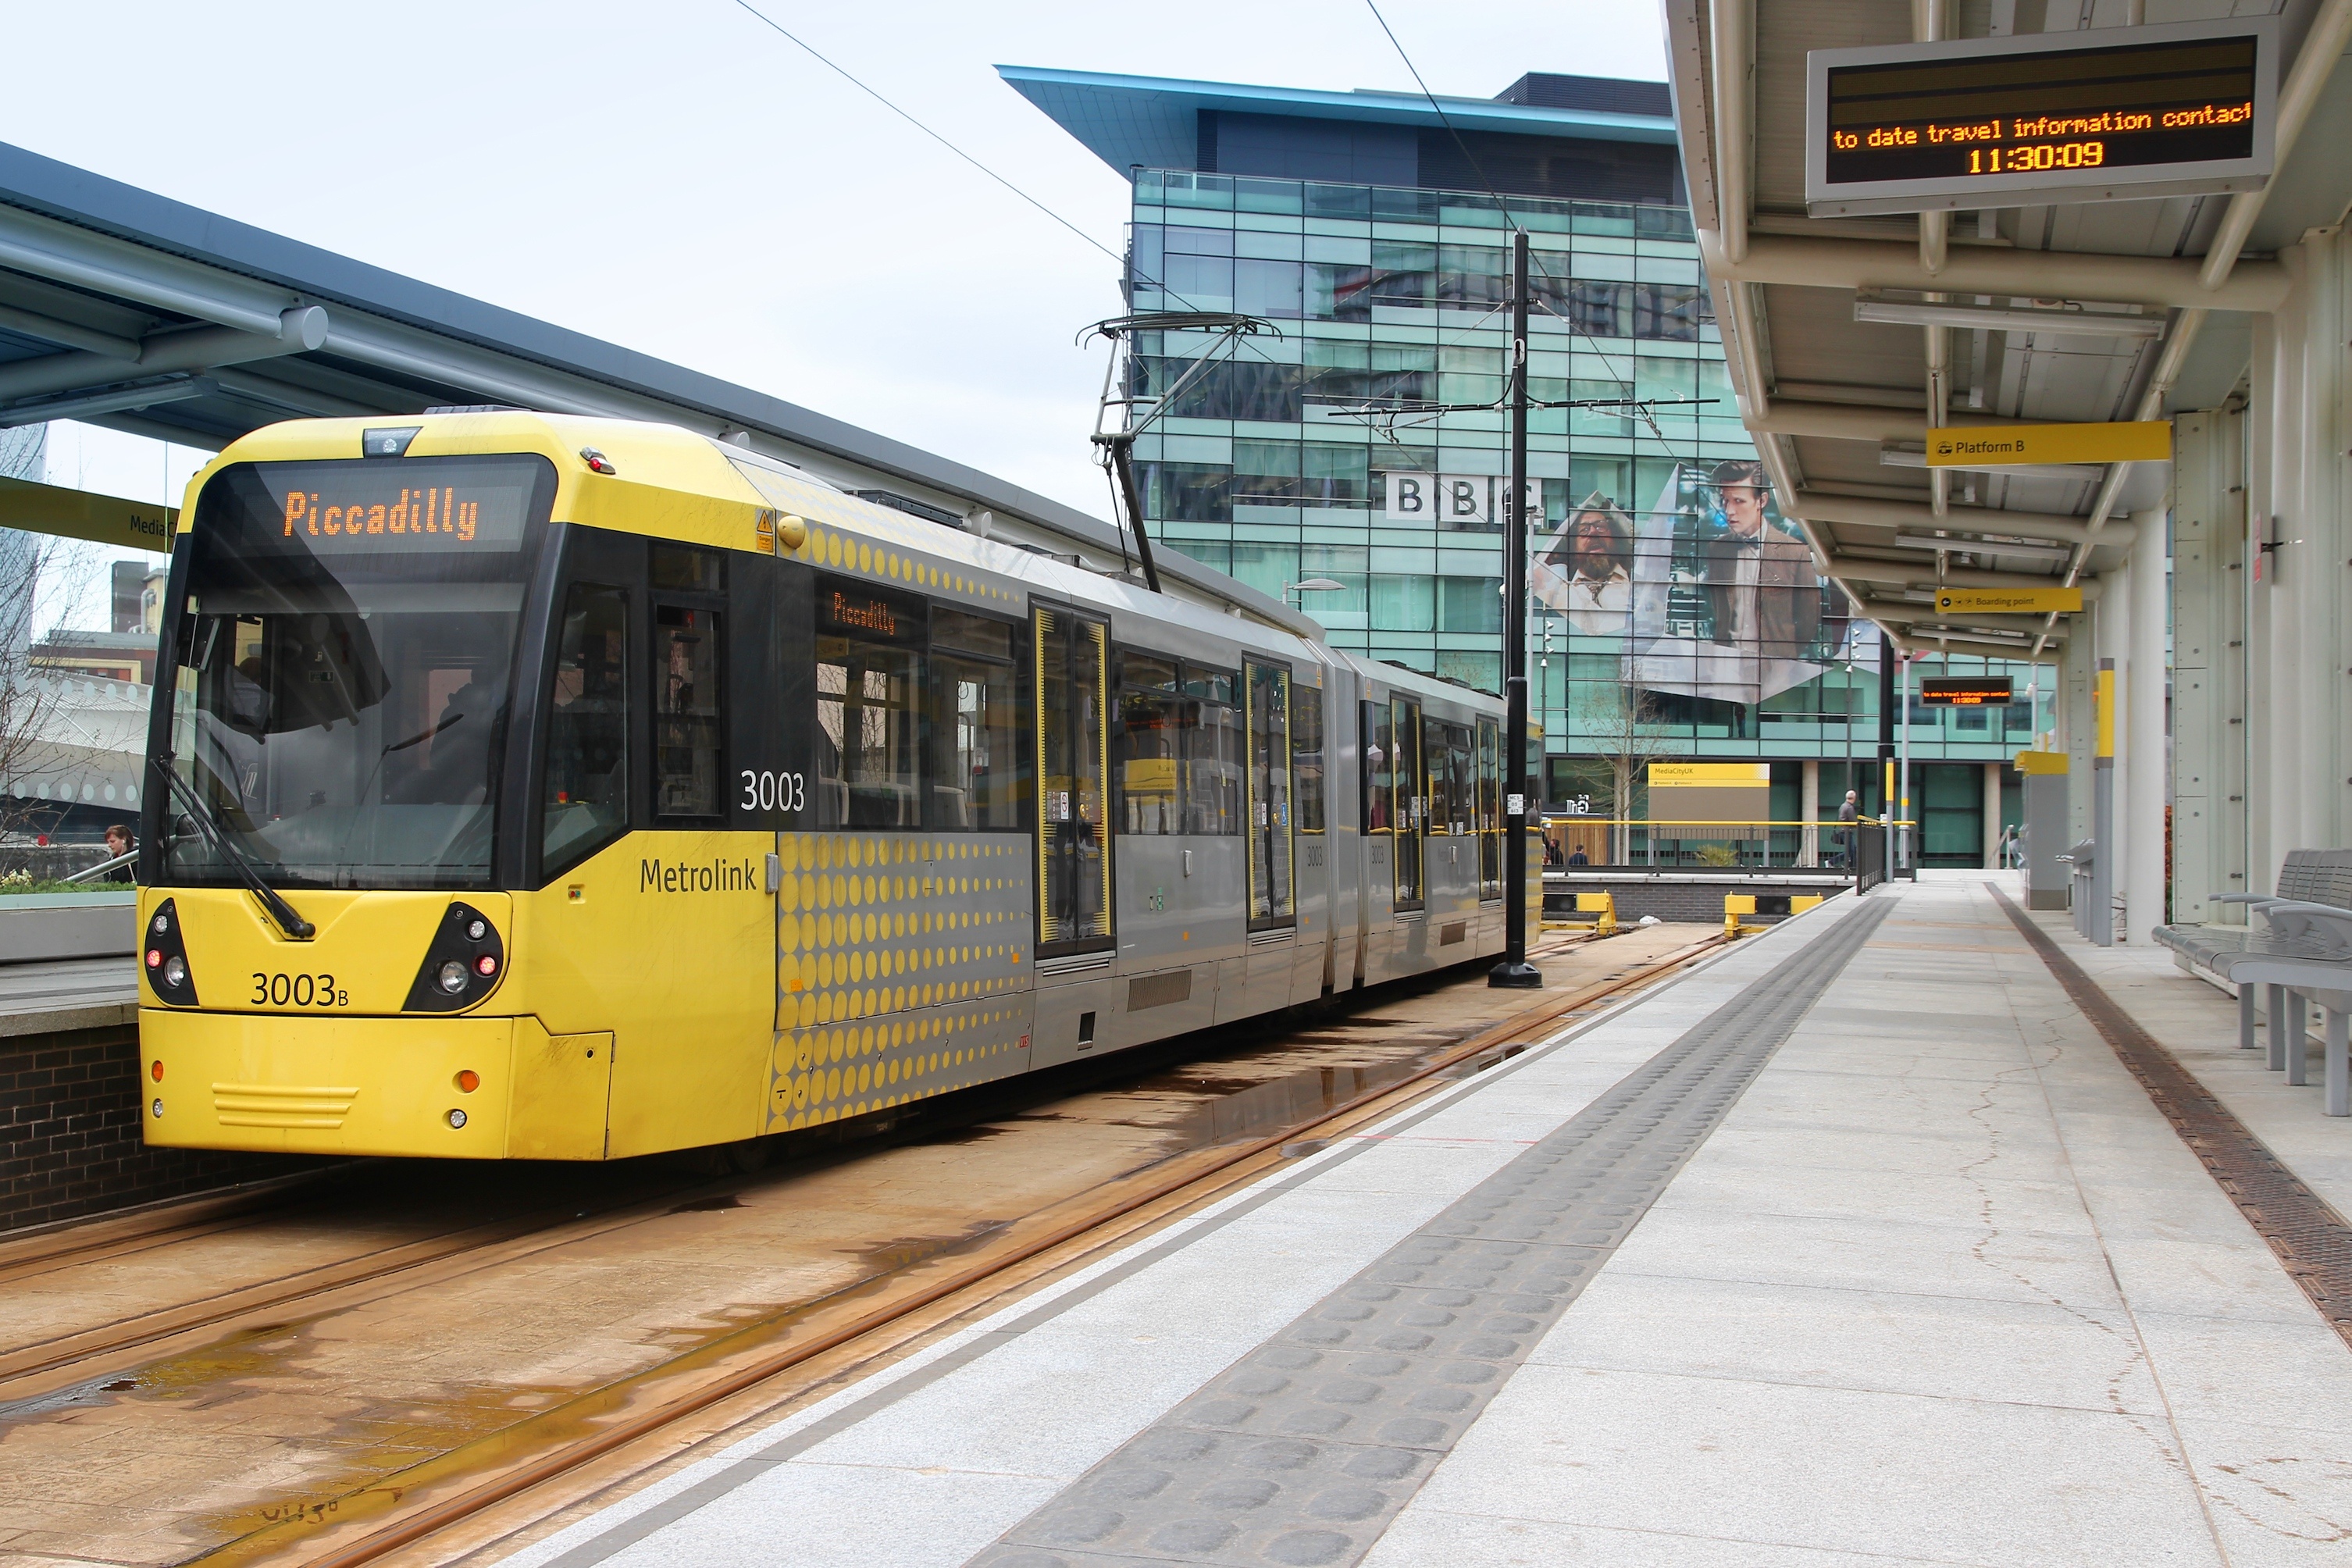 Manchester has a superb tram service in the city